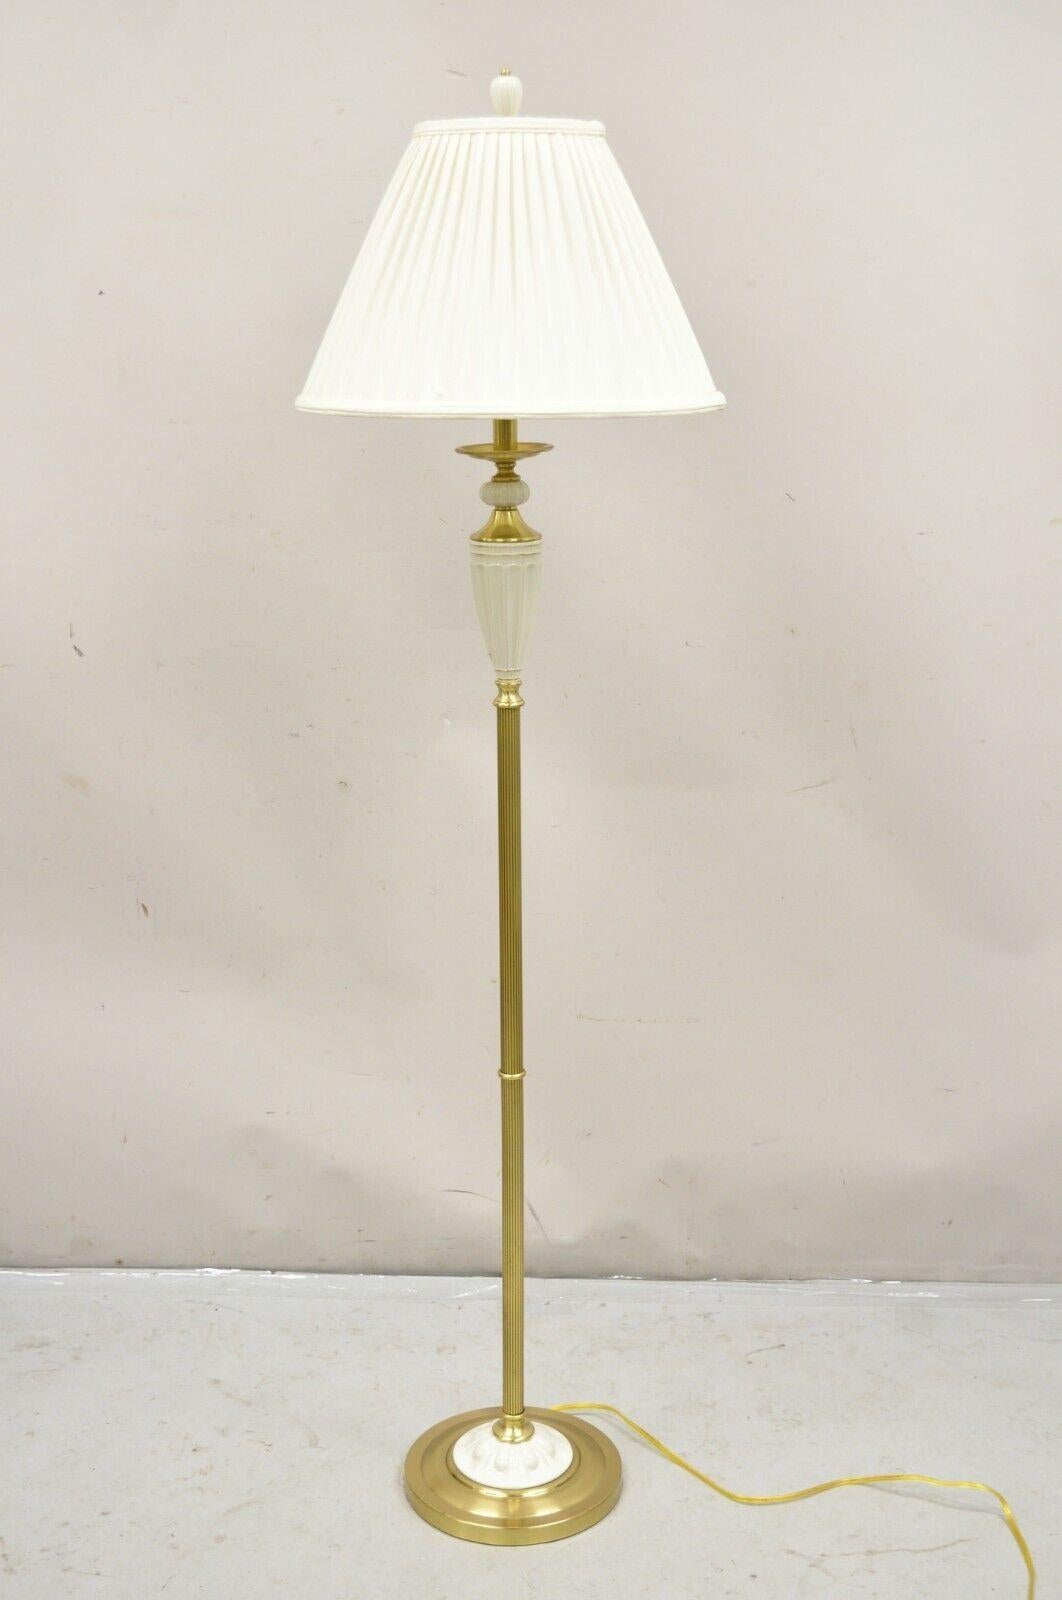 Lenox Quoizel White Porcelain Brass Candlestick Pole Floor Lamp with Original Cloth Shade. Circa Late 20th Century.
Measurements: 
Lamp: 62.5